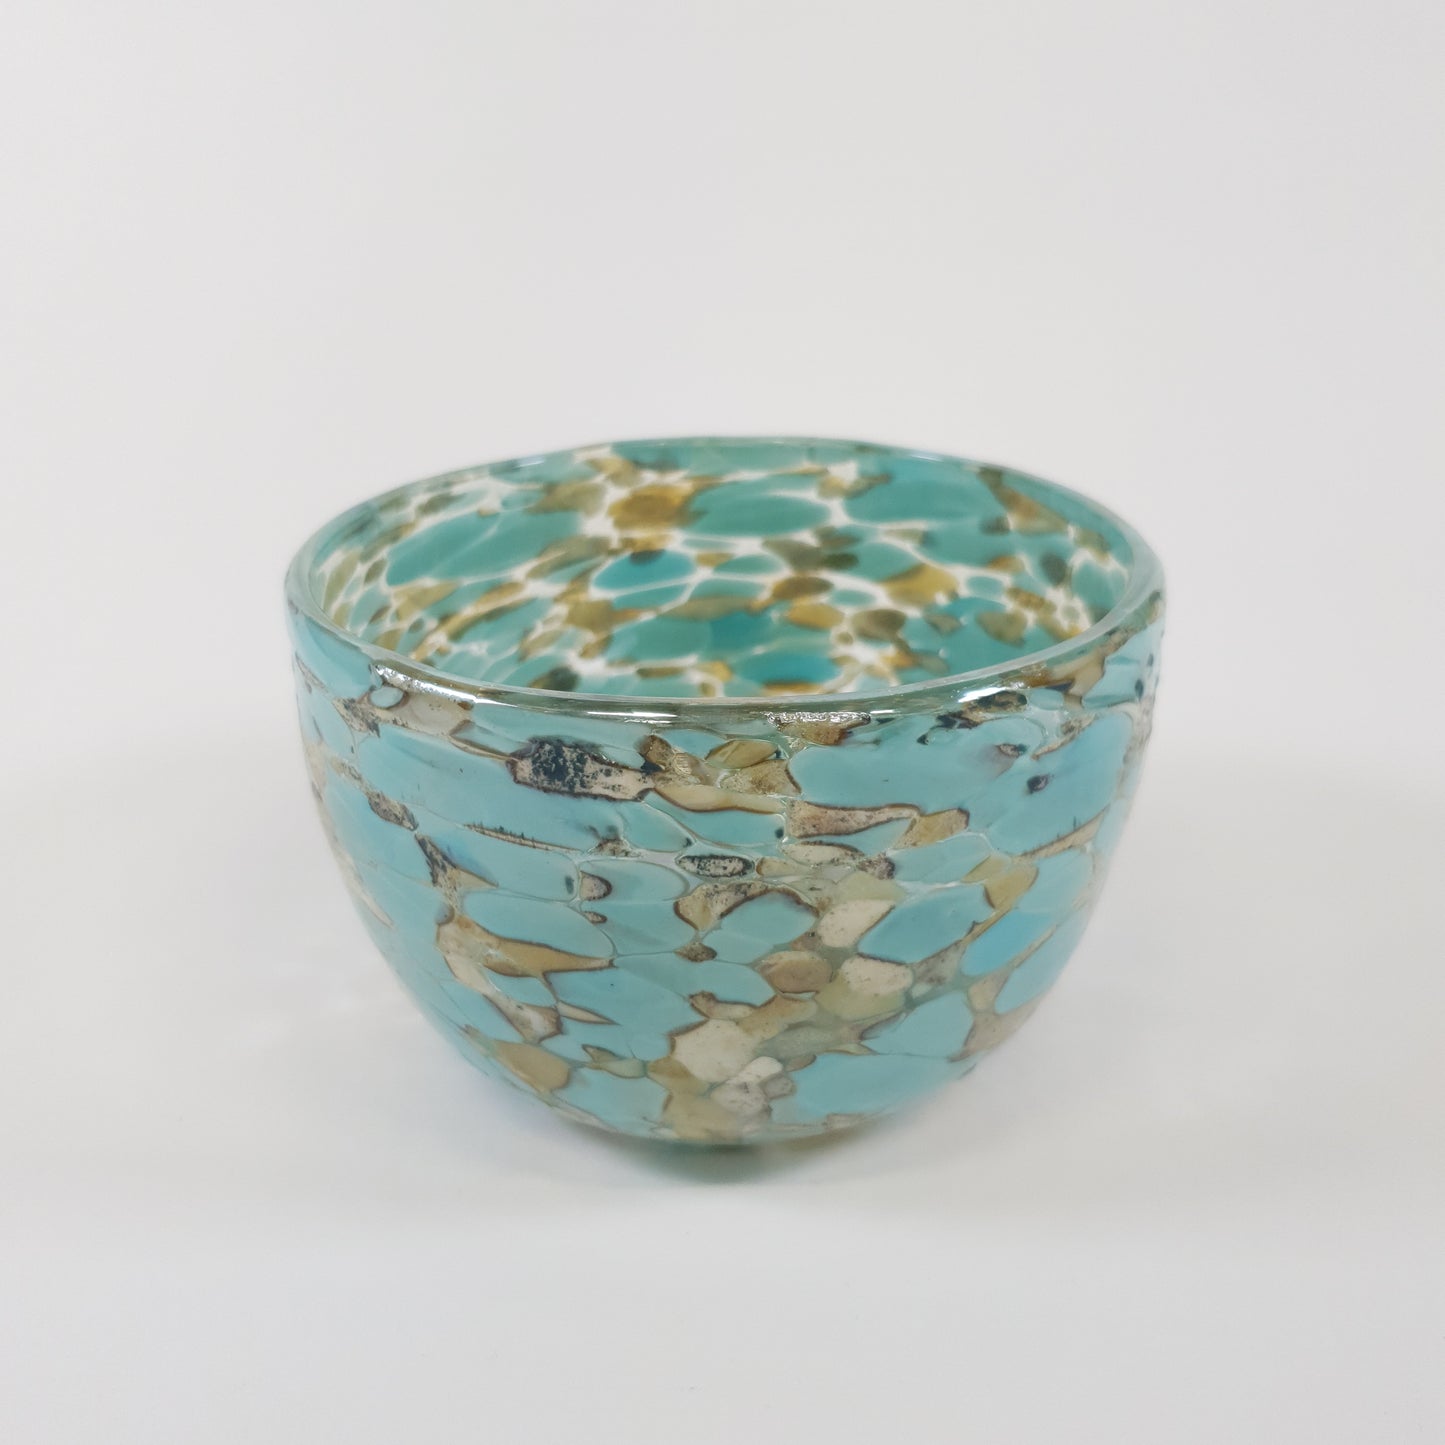 Sirena Turquesa Edition - Turquoise & Marbled Contemporay Bowl